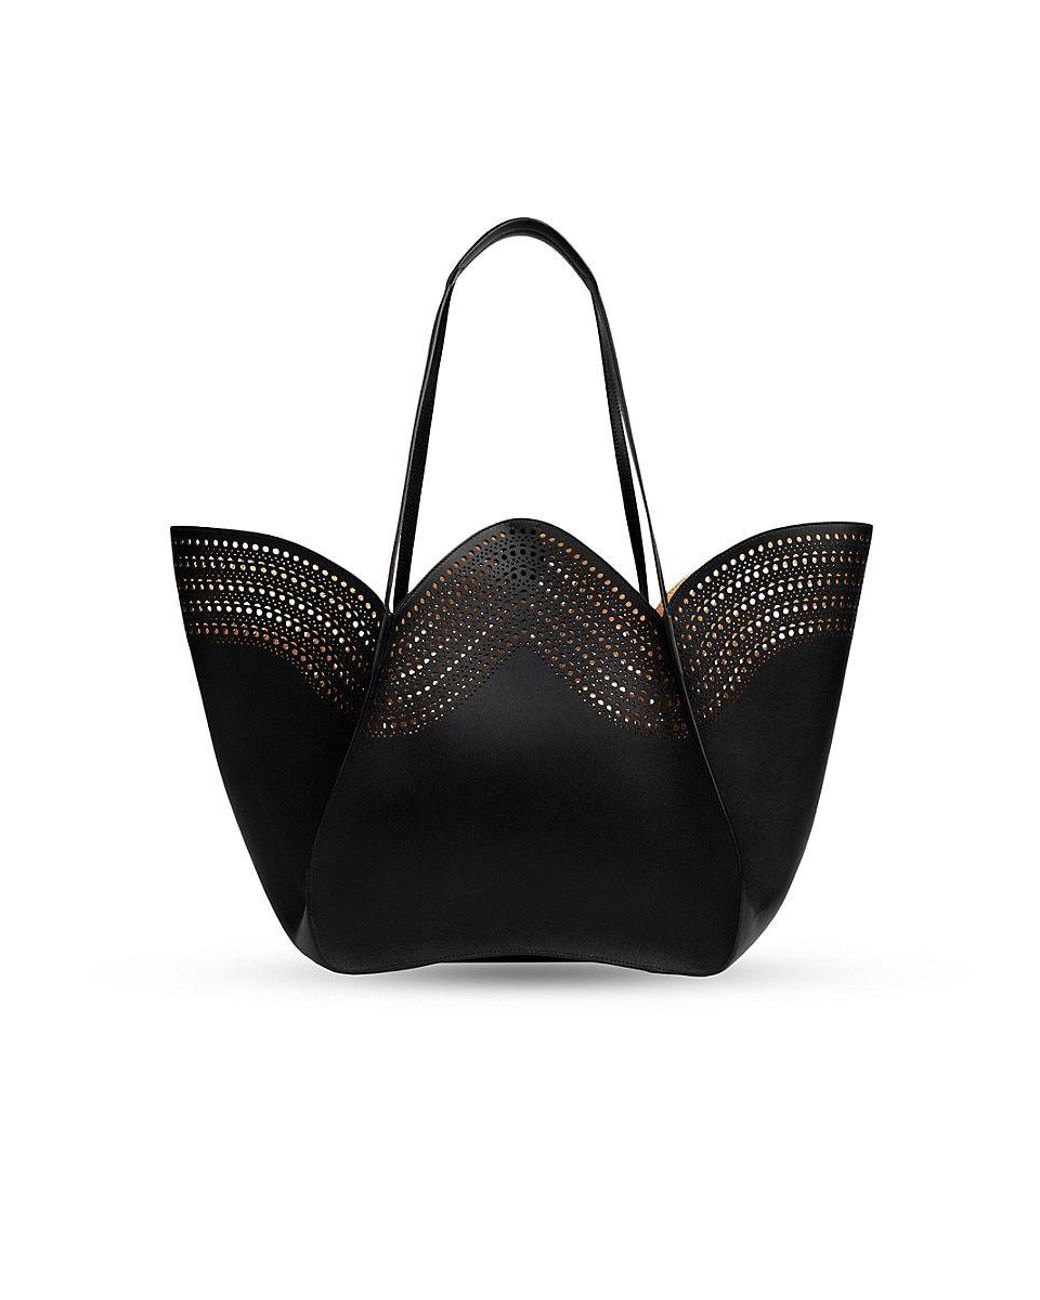 Alaïa Lili 24 Perforated Leather Tote in Black | Lyst